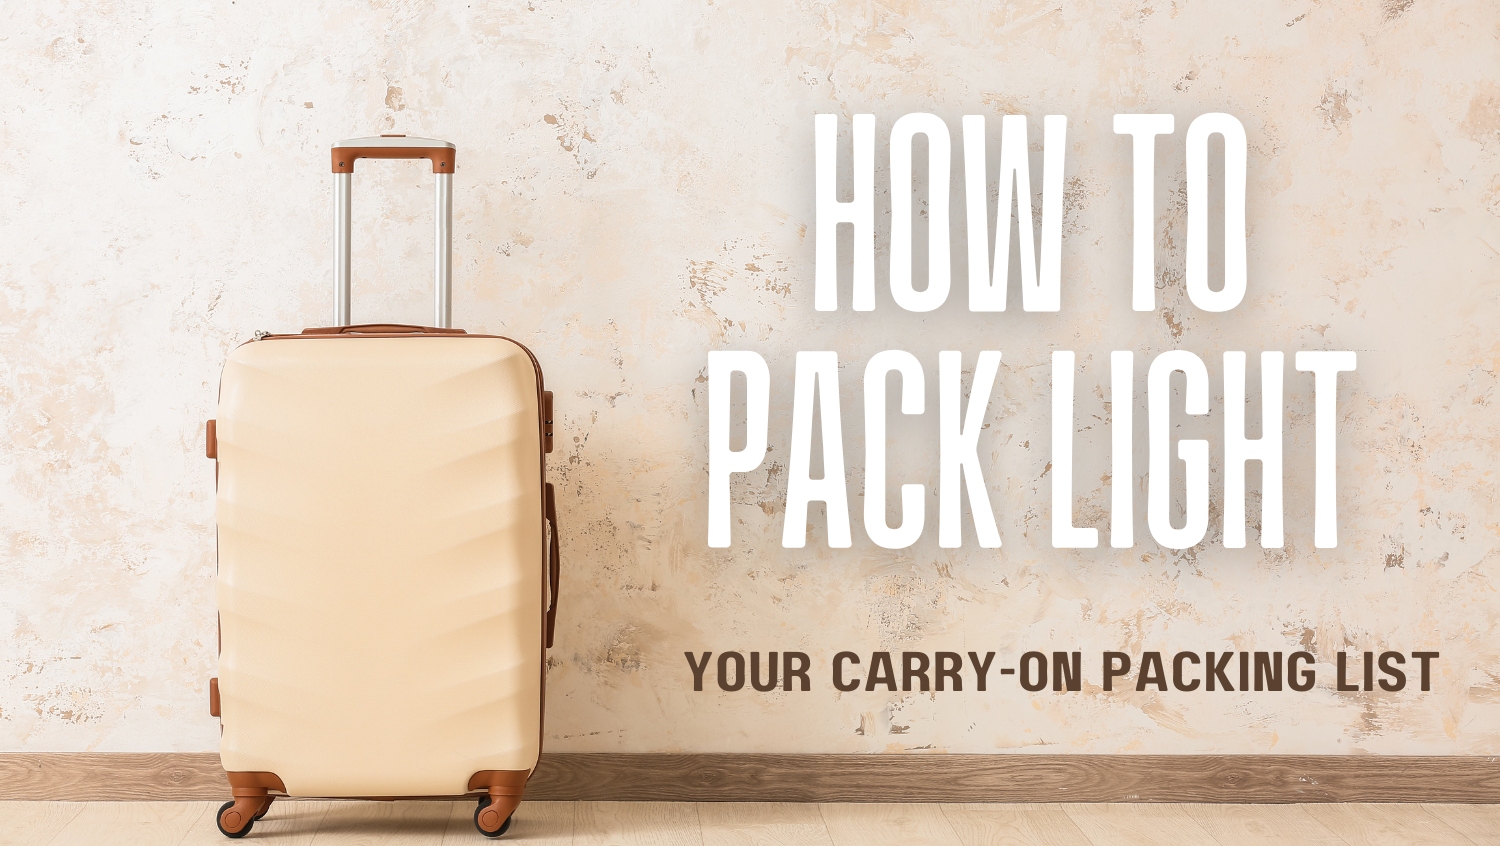 image of suitcase with text: how to pack light, your carry-on packing list